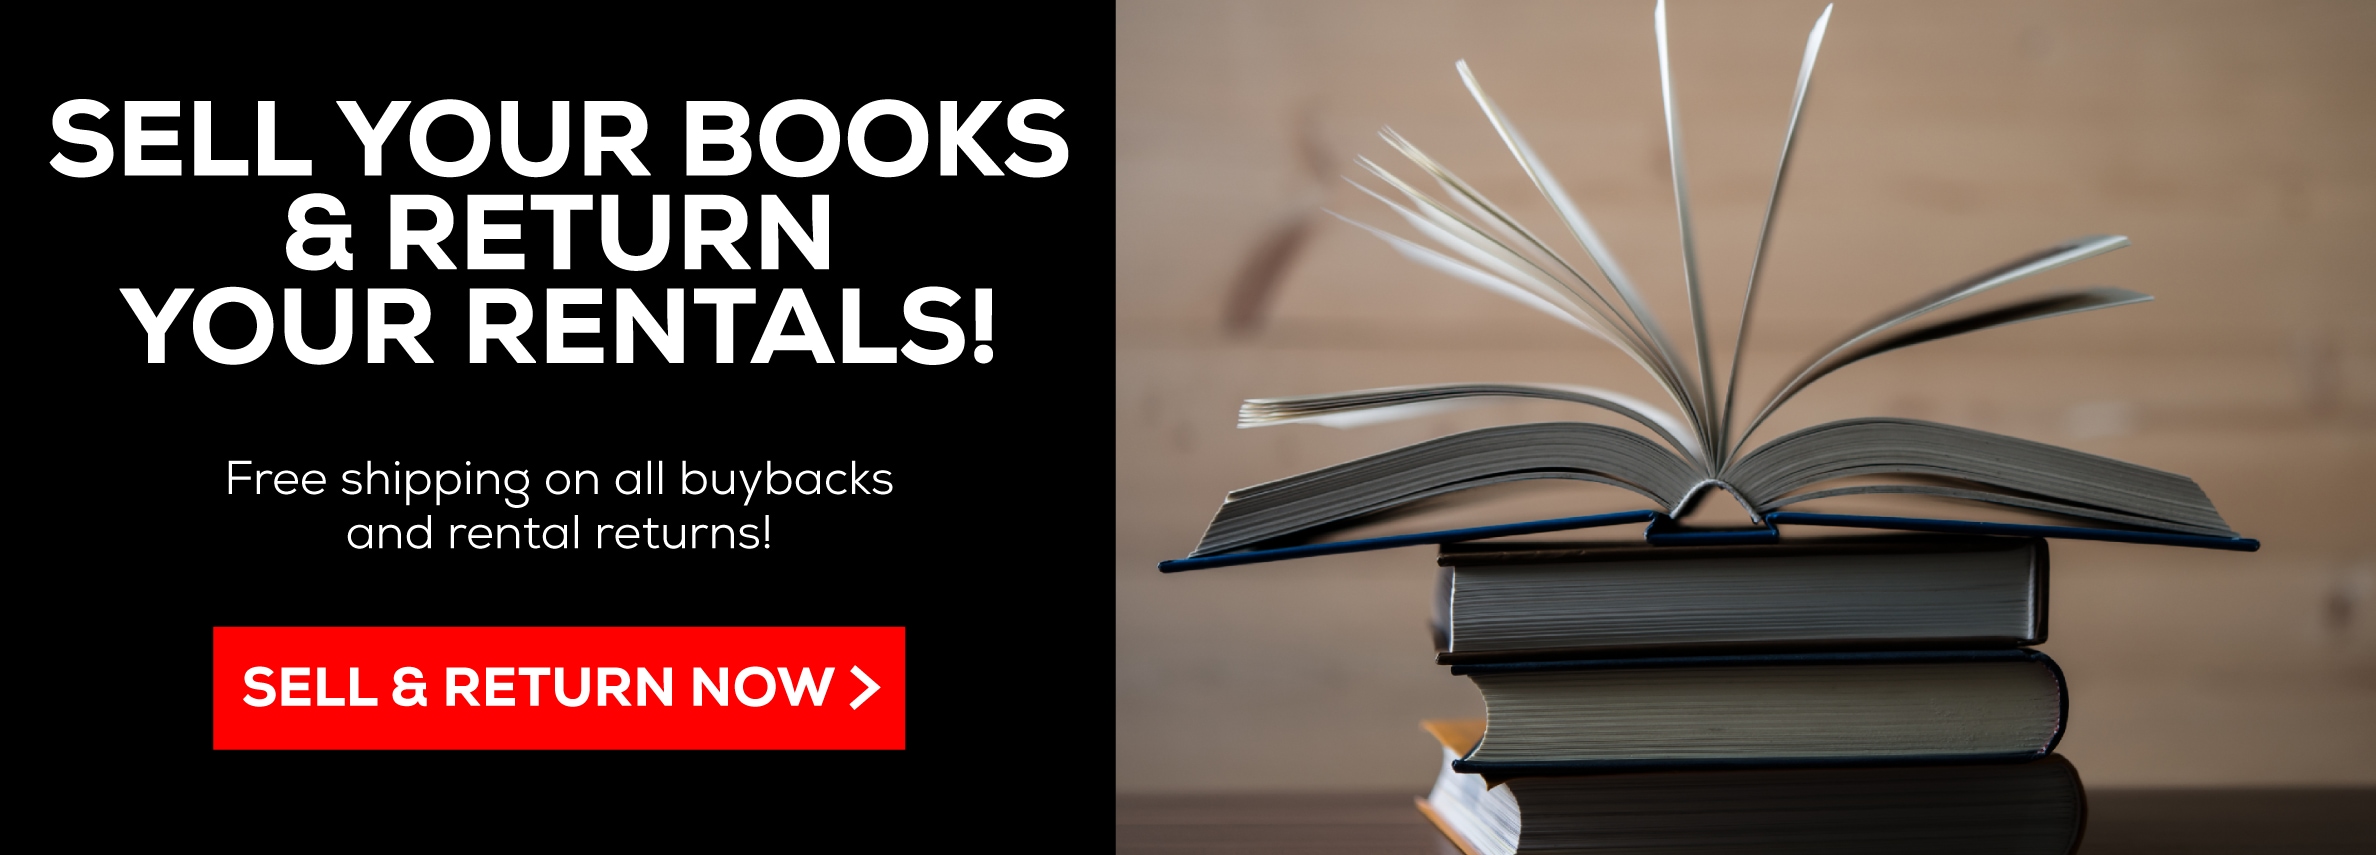 Sell Your Books & Return Your Rentals! Free shipping on all buybacks and rental returns! Sell & Return Now!